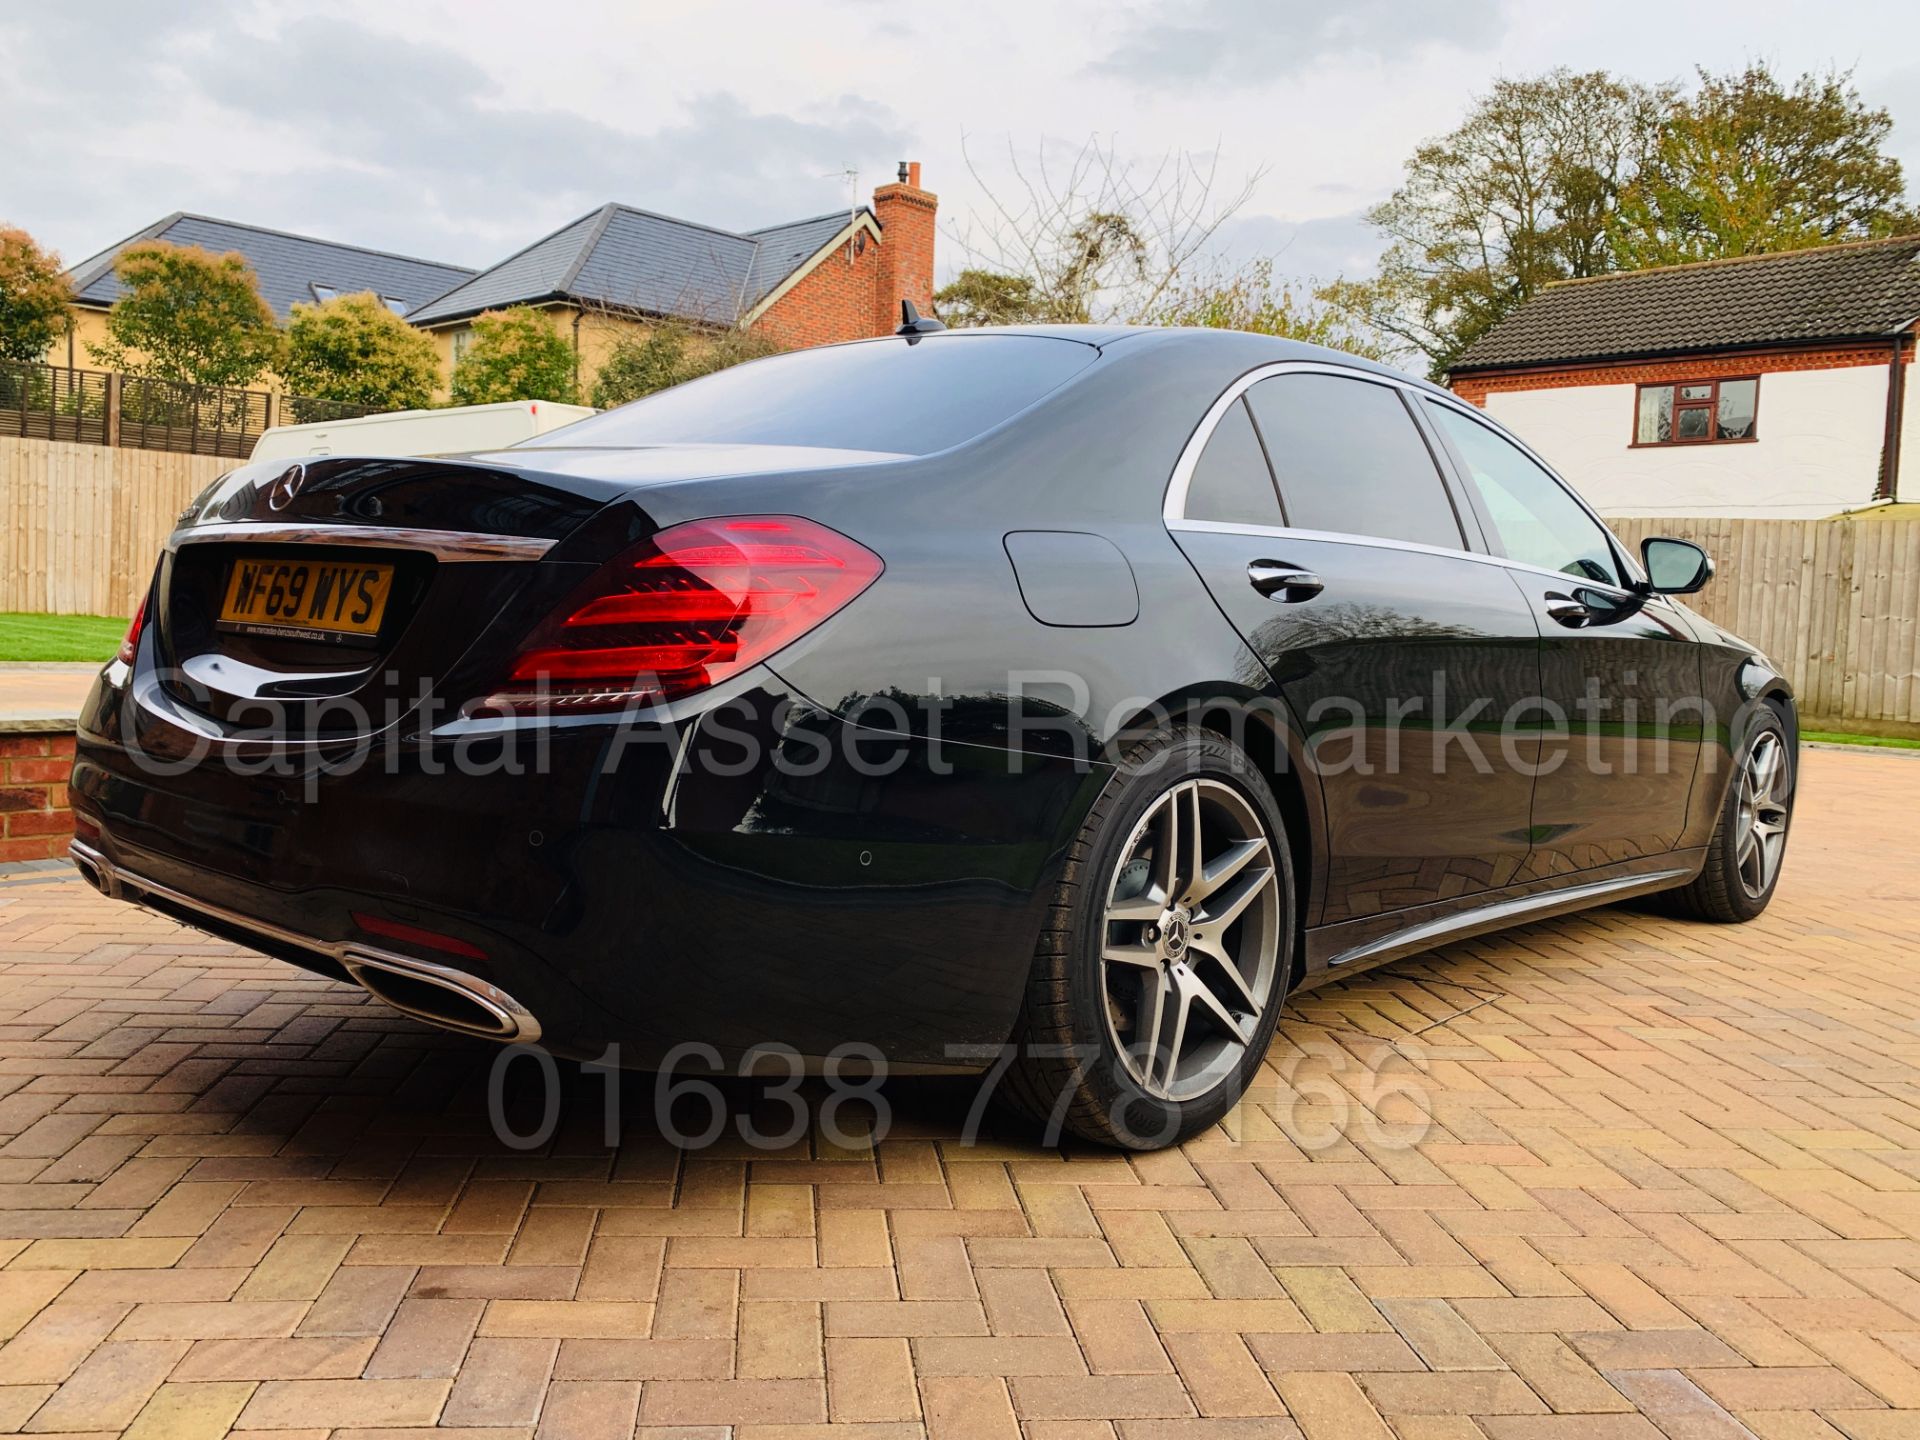 (On Sale) MERCEDES-BENZ S350d LWB *AMG - LUXURY SALOON* (69 REG) 9-G TRONIC AUTO *TOP OF THE RANGE* - Image 13 of 66